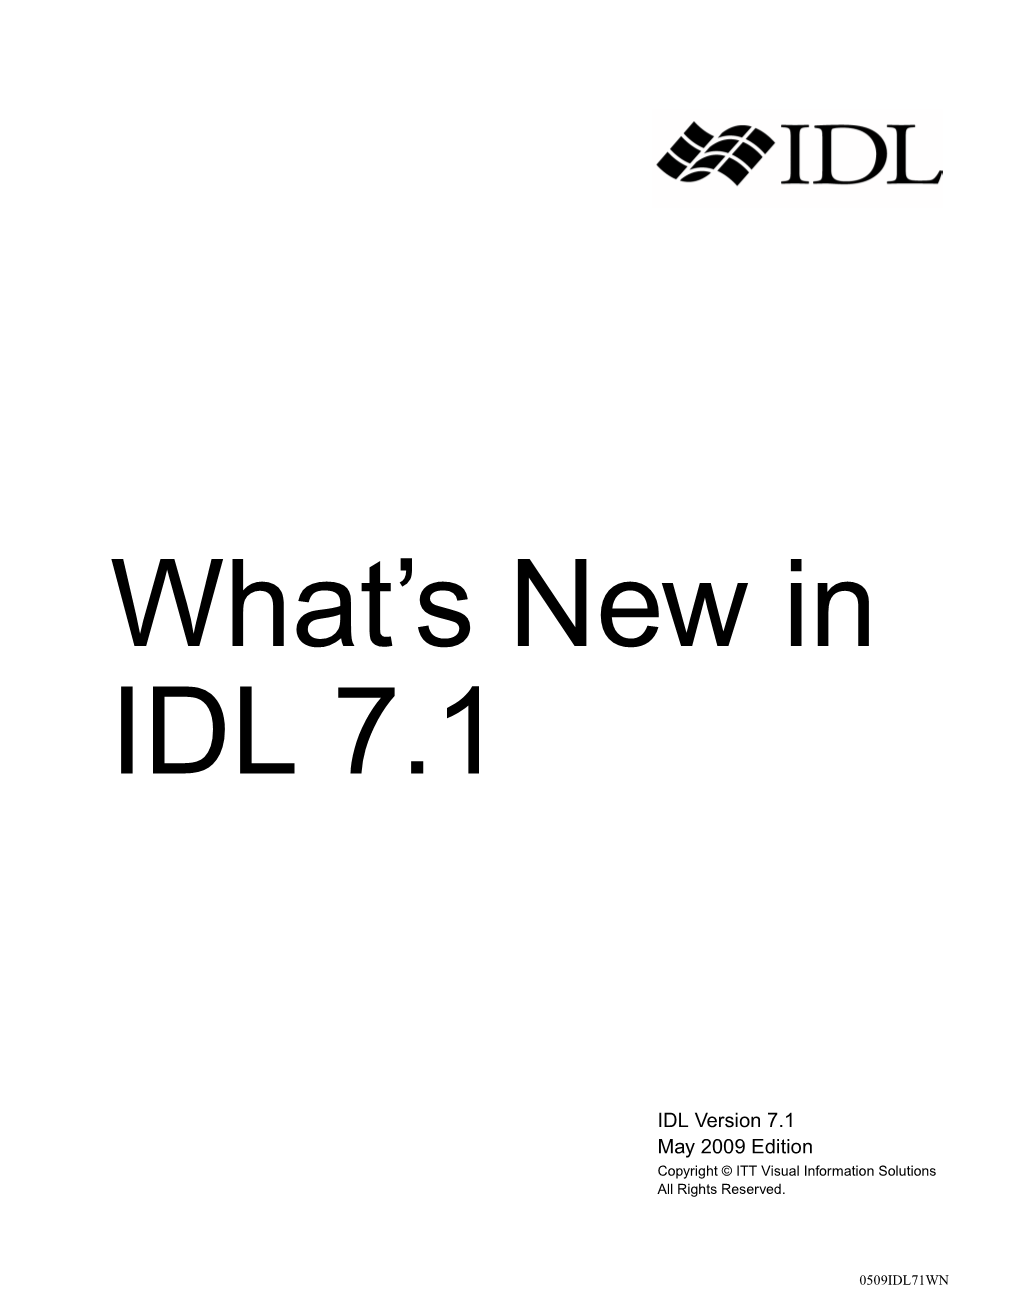 What's New in IDL